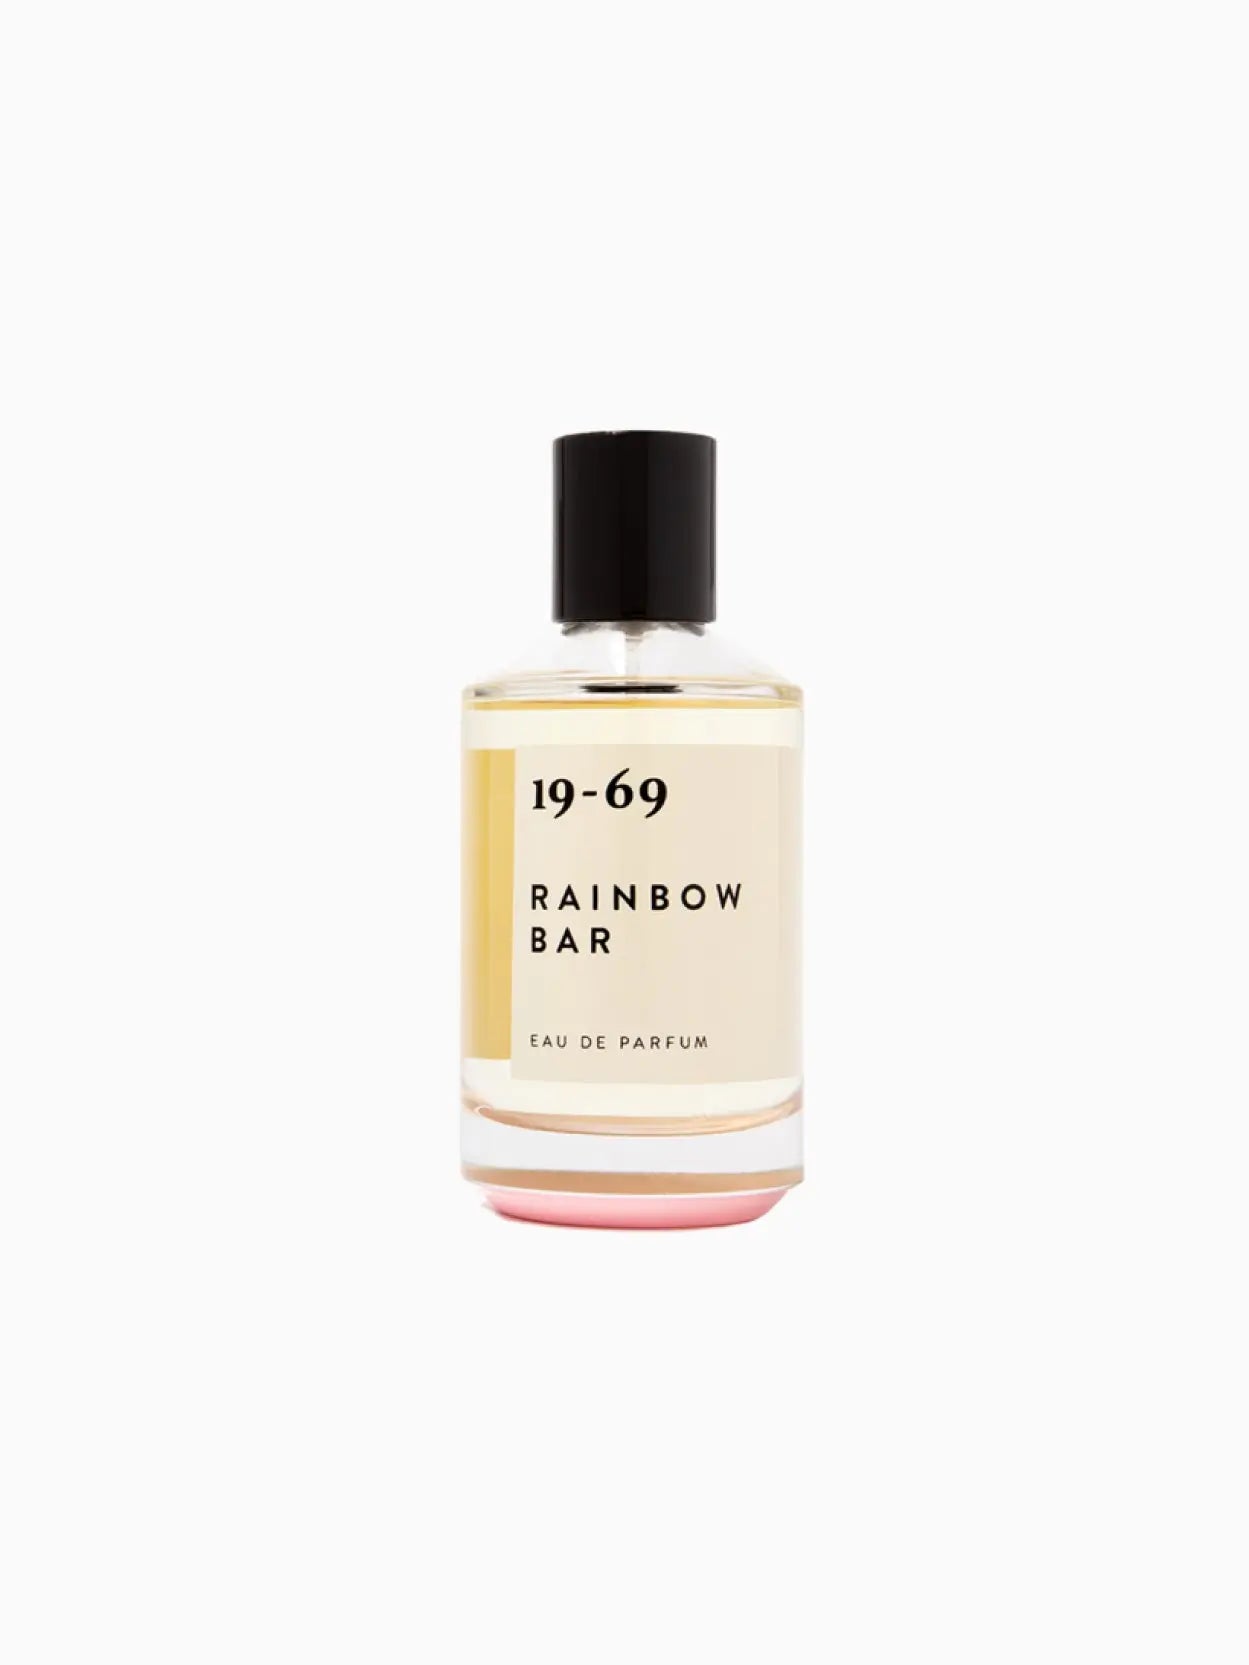 A bottle of perfume labeled "Rainbow Bar 100ml" by 19-69 stands elegantly. The transparent bottle with a black cap reveals a light yellow liquid inside. Its minimalist label, featuring black text on a white background, hints at the sophistication you'd find in a boutique store in Barcelona.